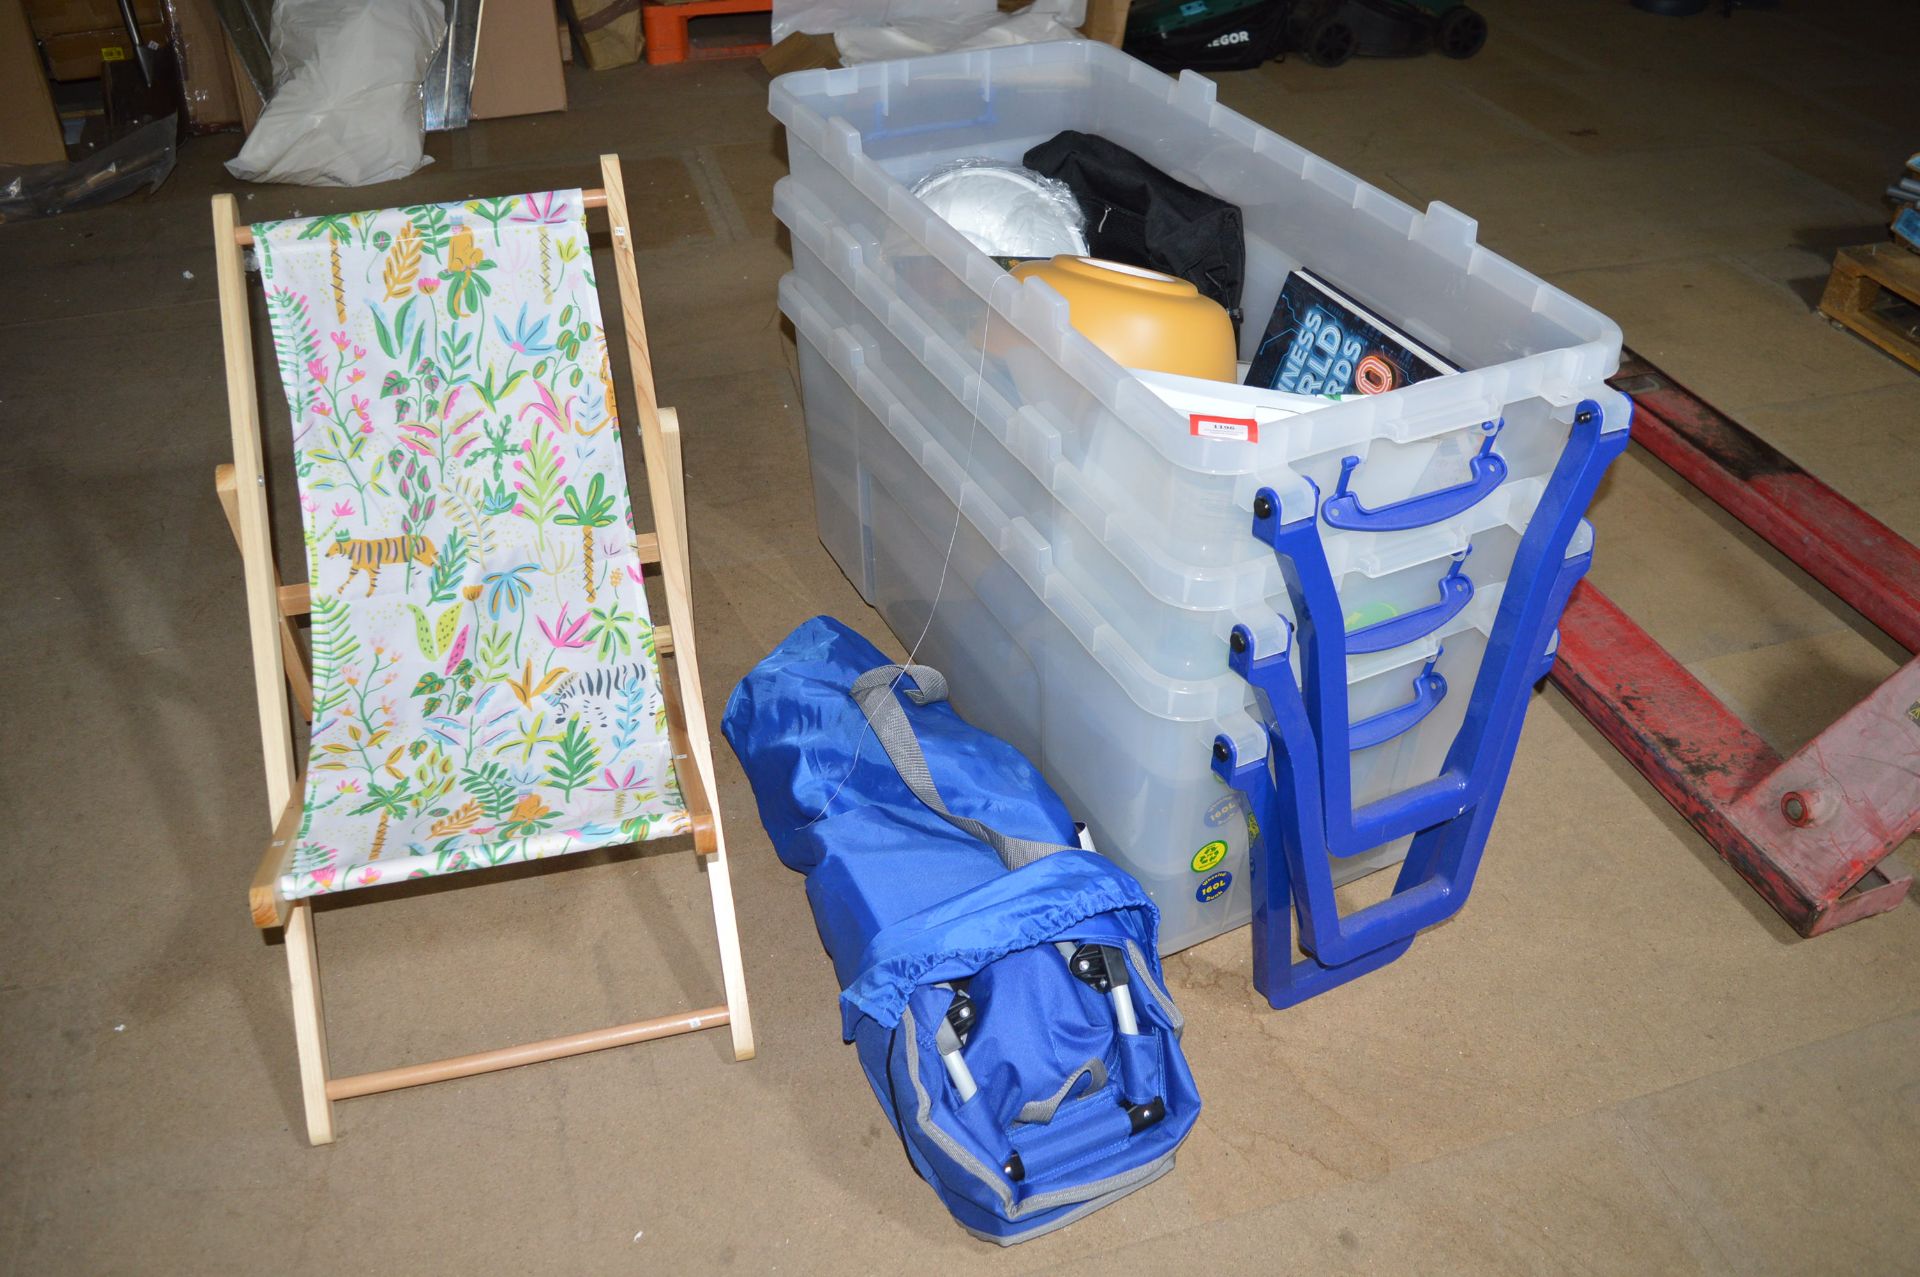 Three Large Plastic Boxes on Wheels and Contents, Deck Chair, etc.